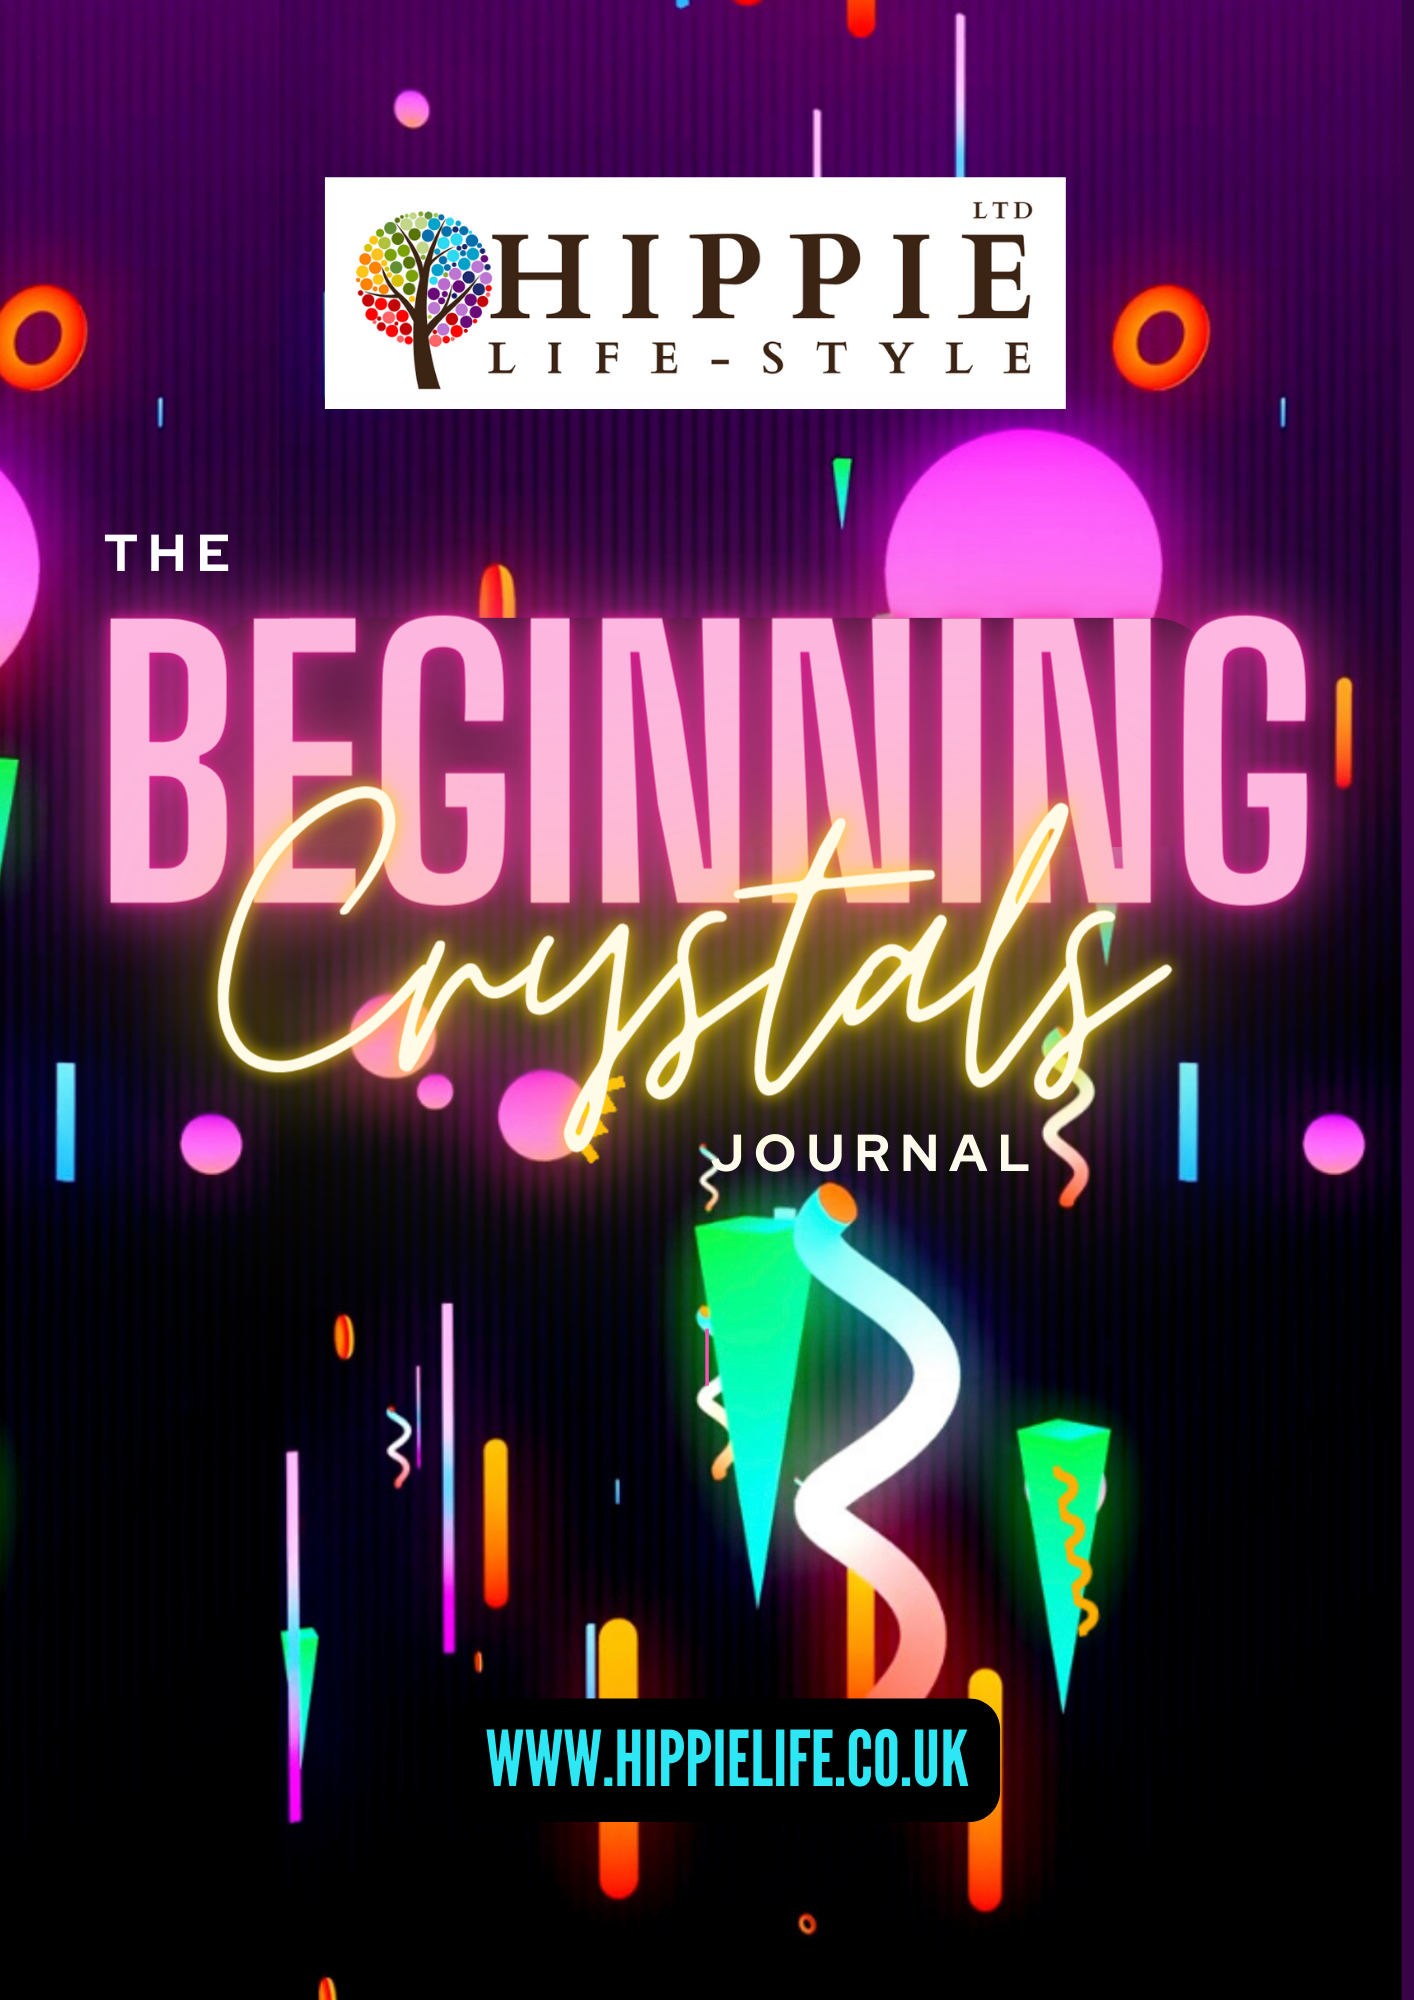 Hippie life UK, the crystal, spiritual and natural holistic health gift shop presents The Beginning Crystals Journal - PDF Download, , HIPPIE Life UK, , , , , .